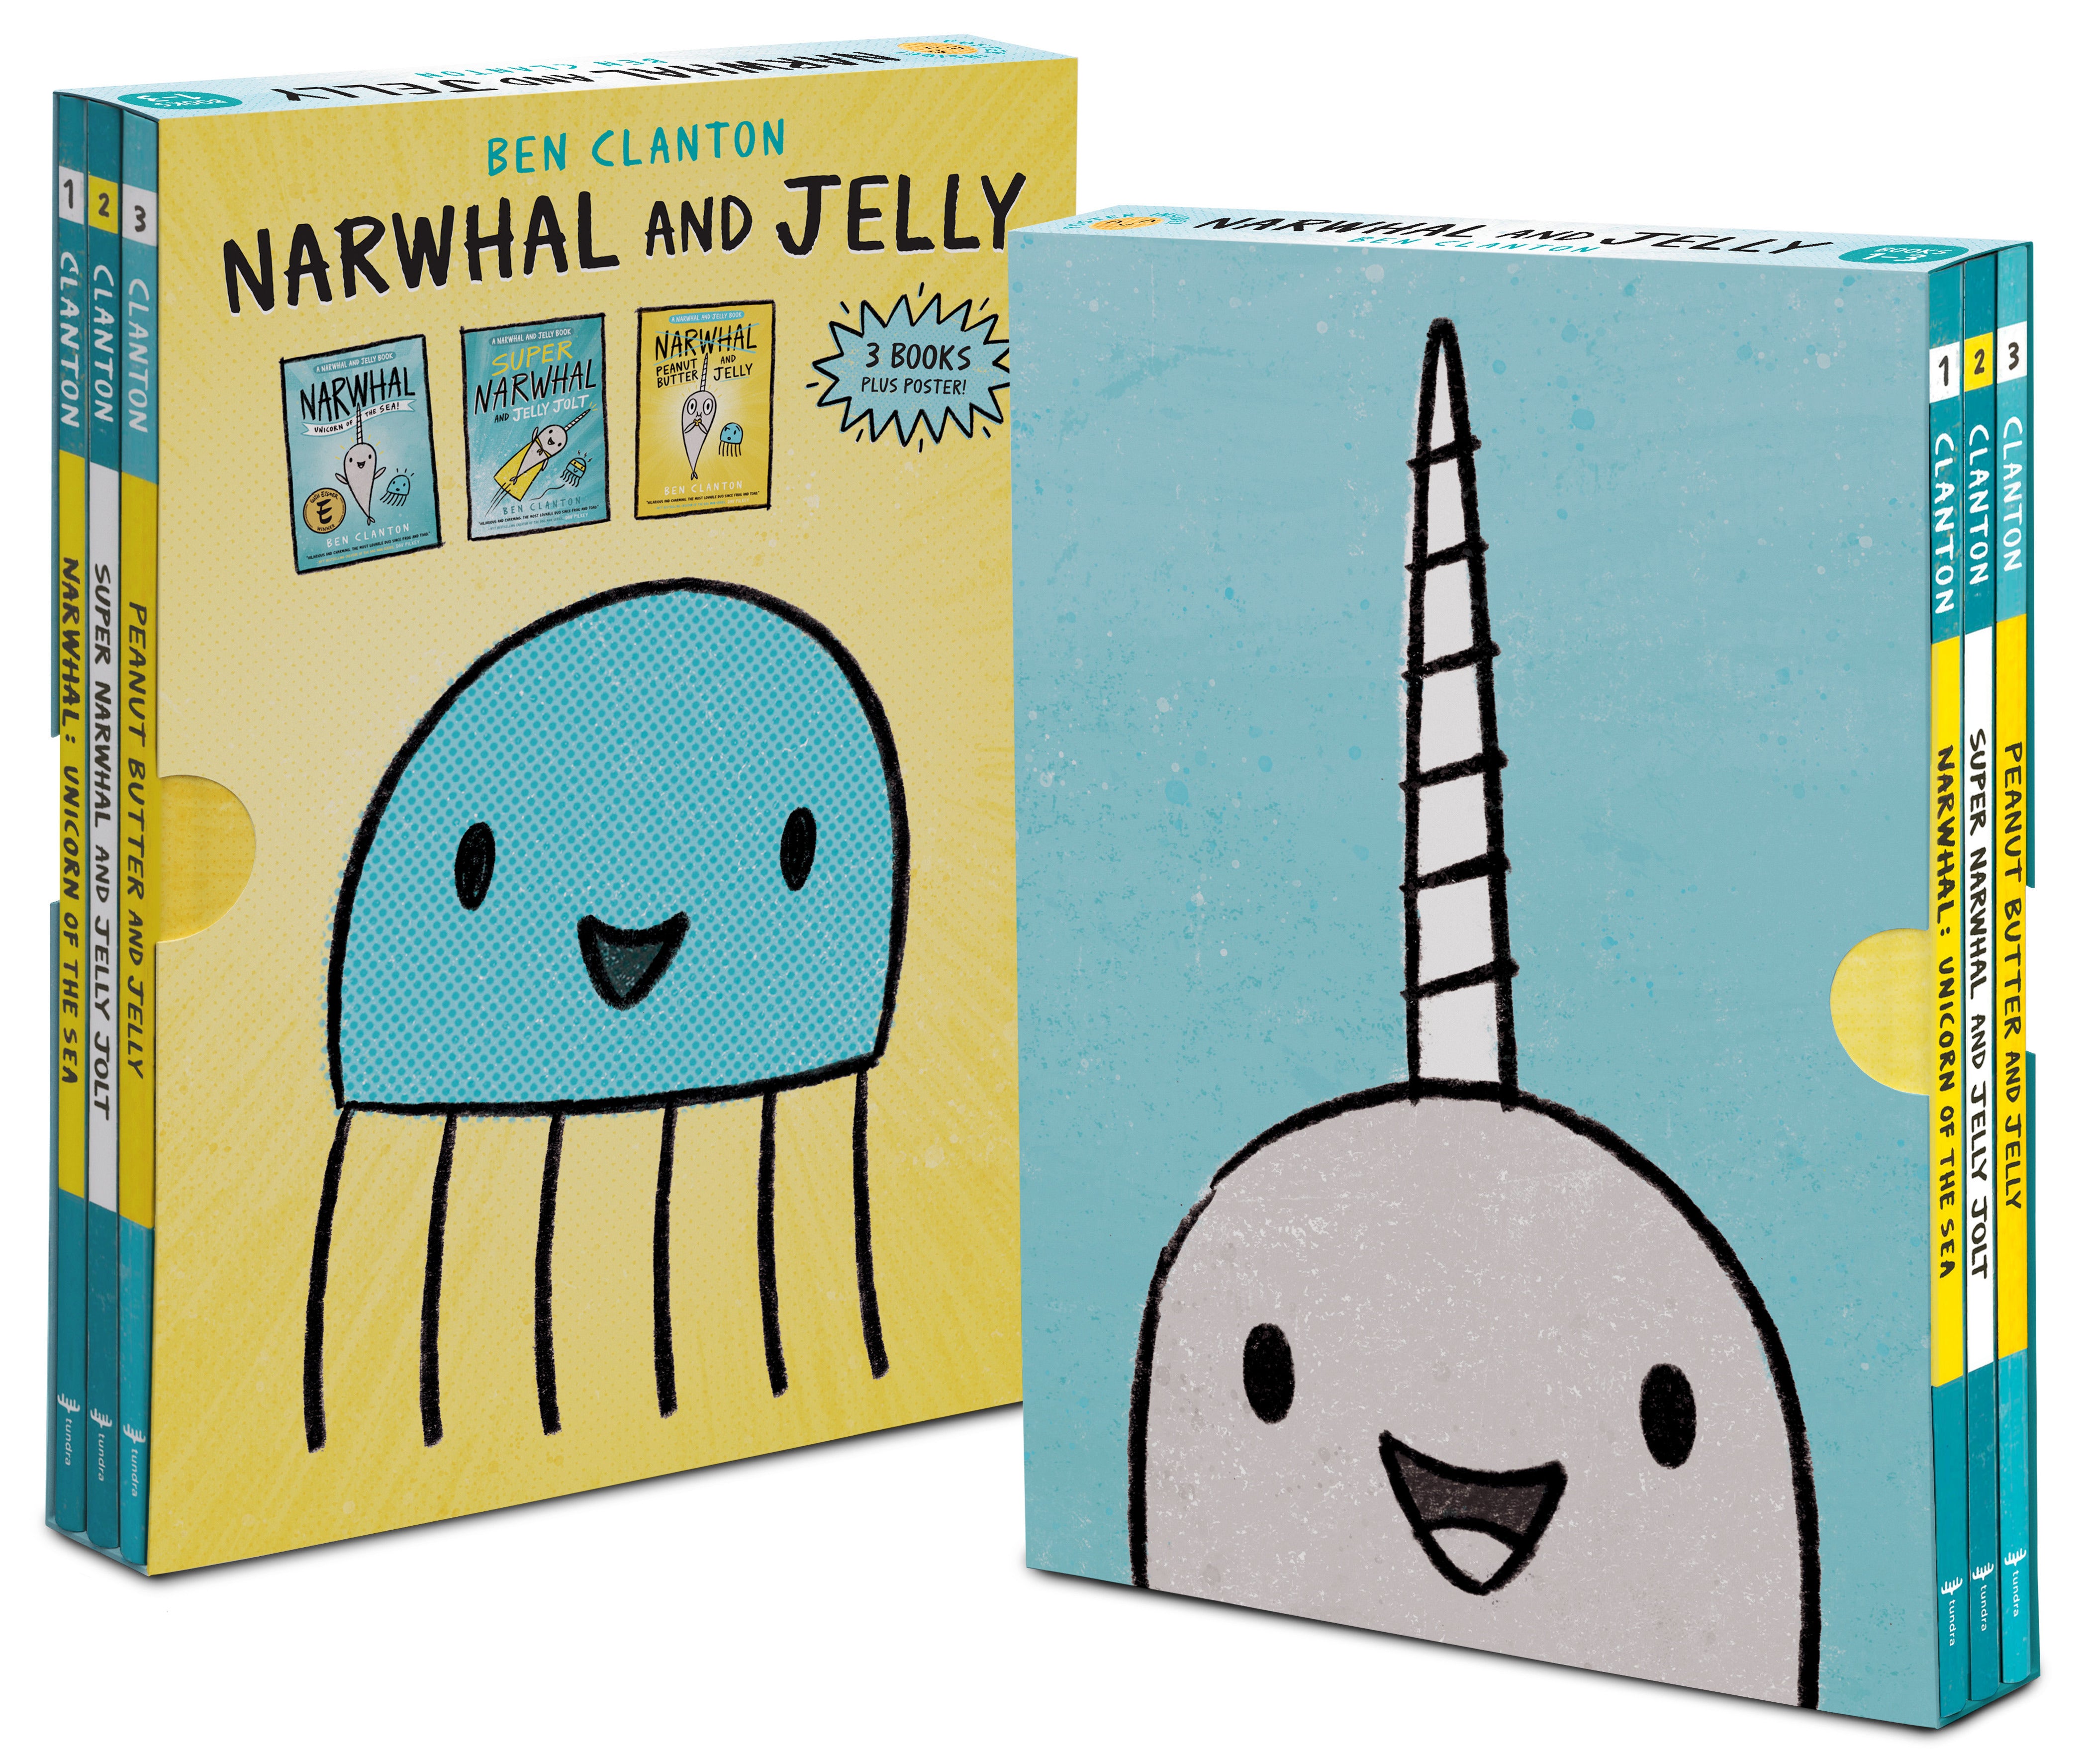 Narwhal and Jelly Box Set (Paperback Books 1, 2, 3, AND Poster)